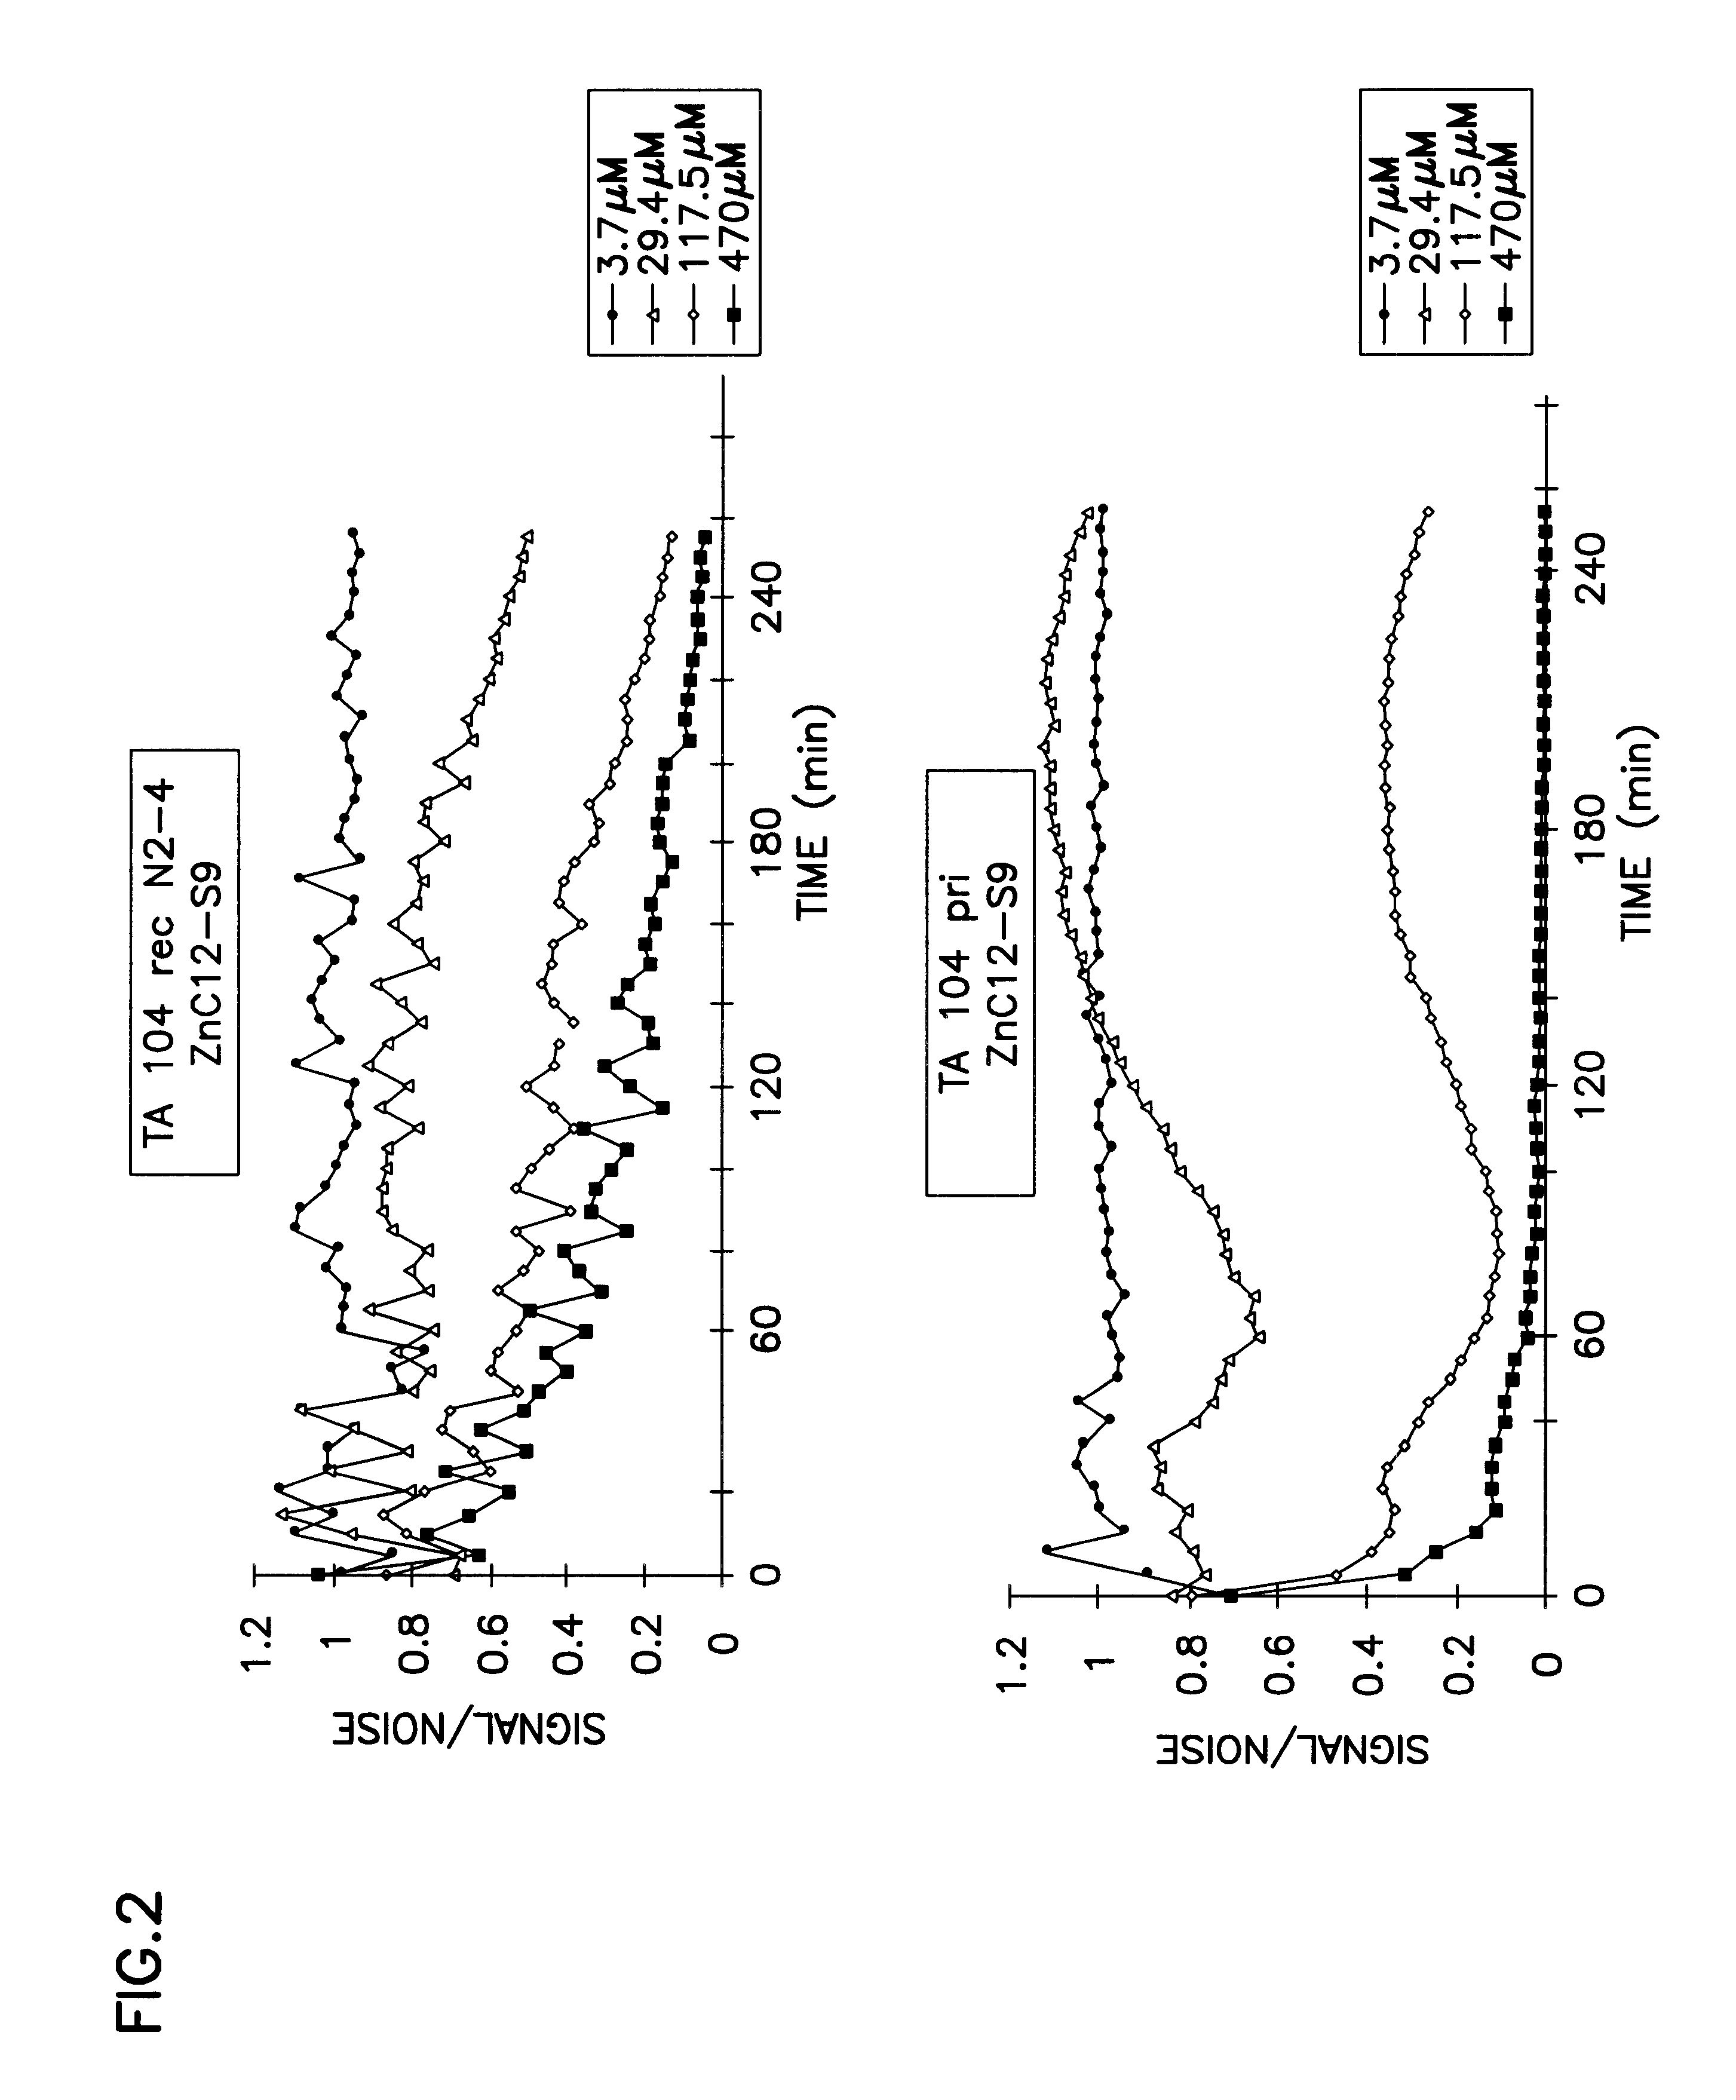 Diagnostic systems and method for determining the presence of a genotoxic and/or toxic compound in a sample